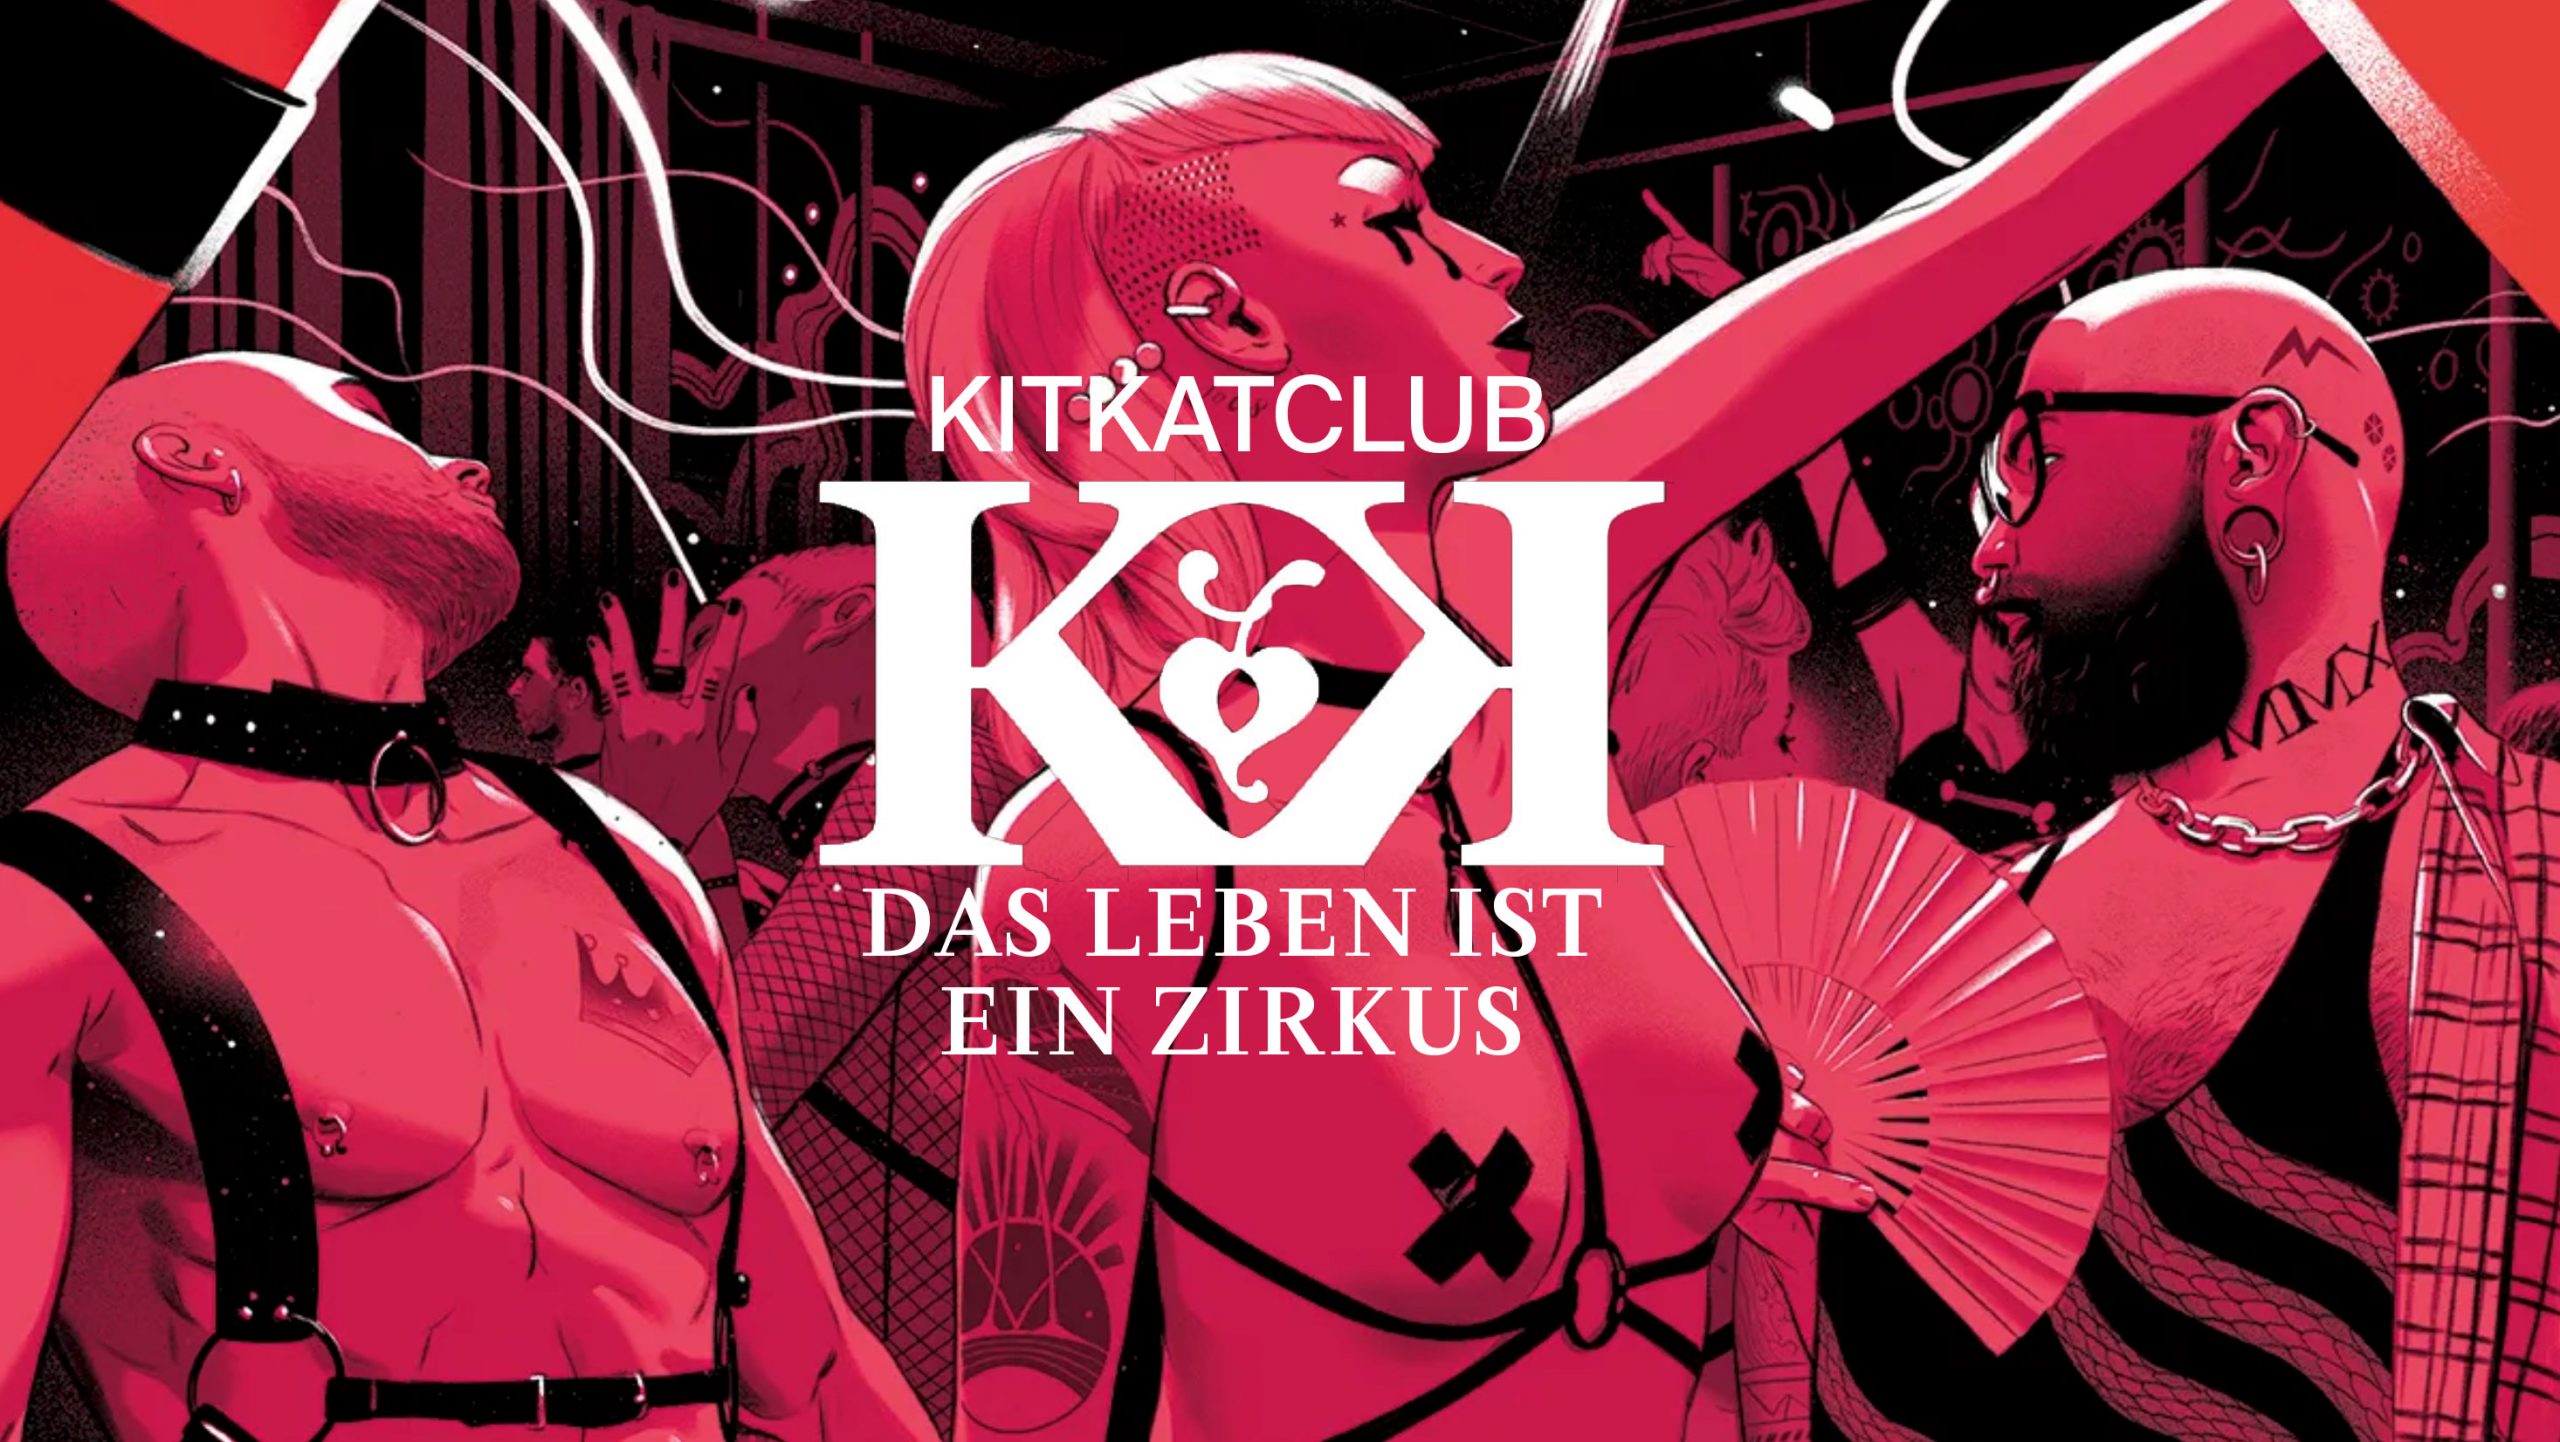 Techno, parties, sex: First time ever a film gives insights behind the doors of legendary Berlin fetish club Kitkat. Shooting starts in summer 2022. Produced by avanti media fiction in co-Production with FunFairFilms.